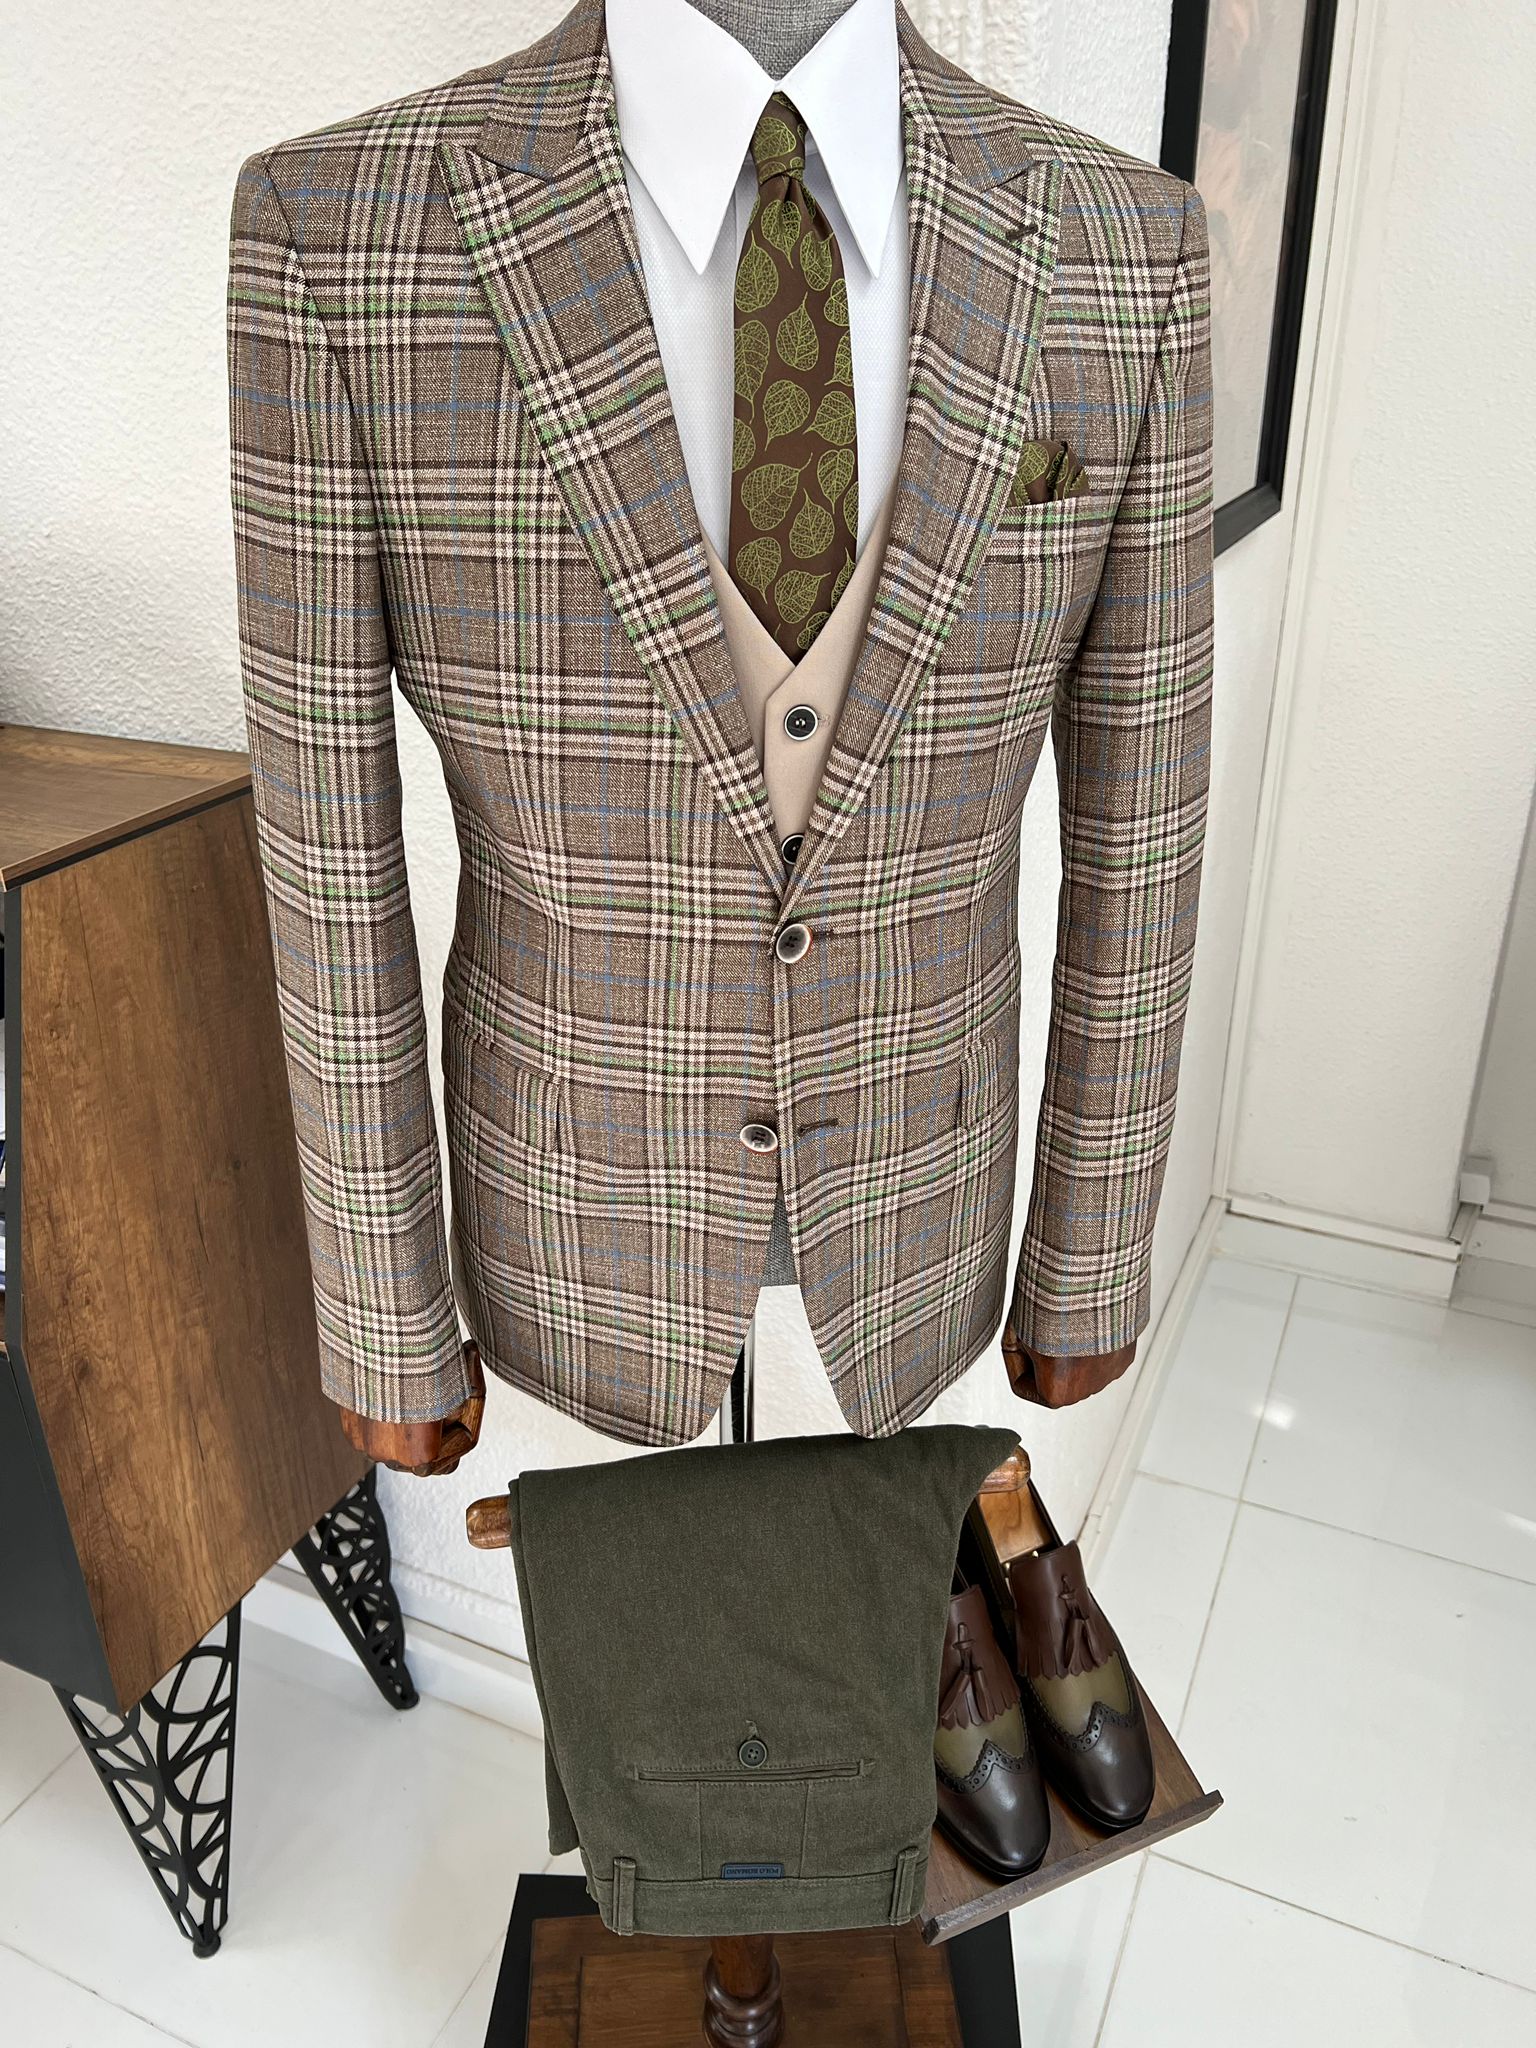 Louis Slim Fit Pointed Collared Beige & Khaki Combination Suit